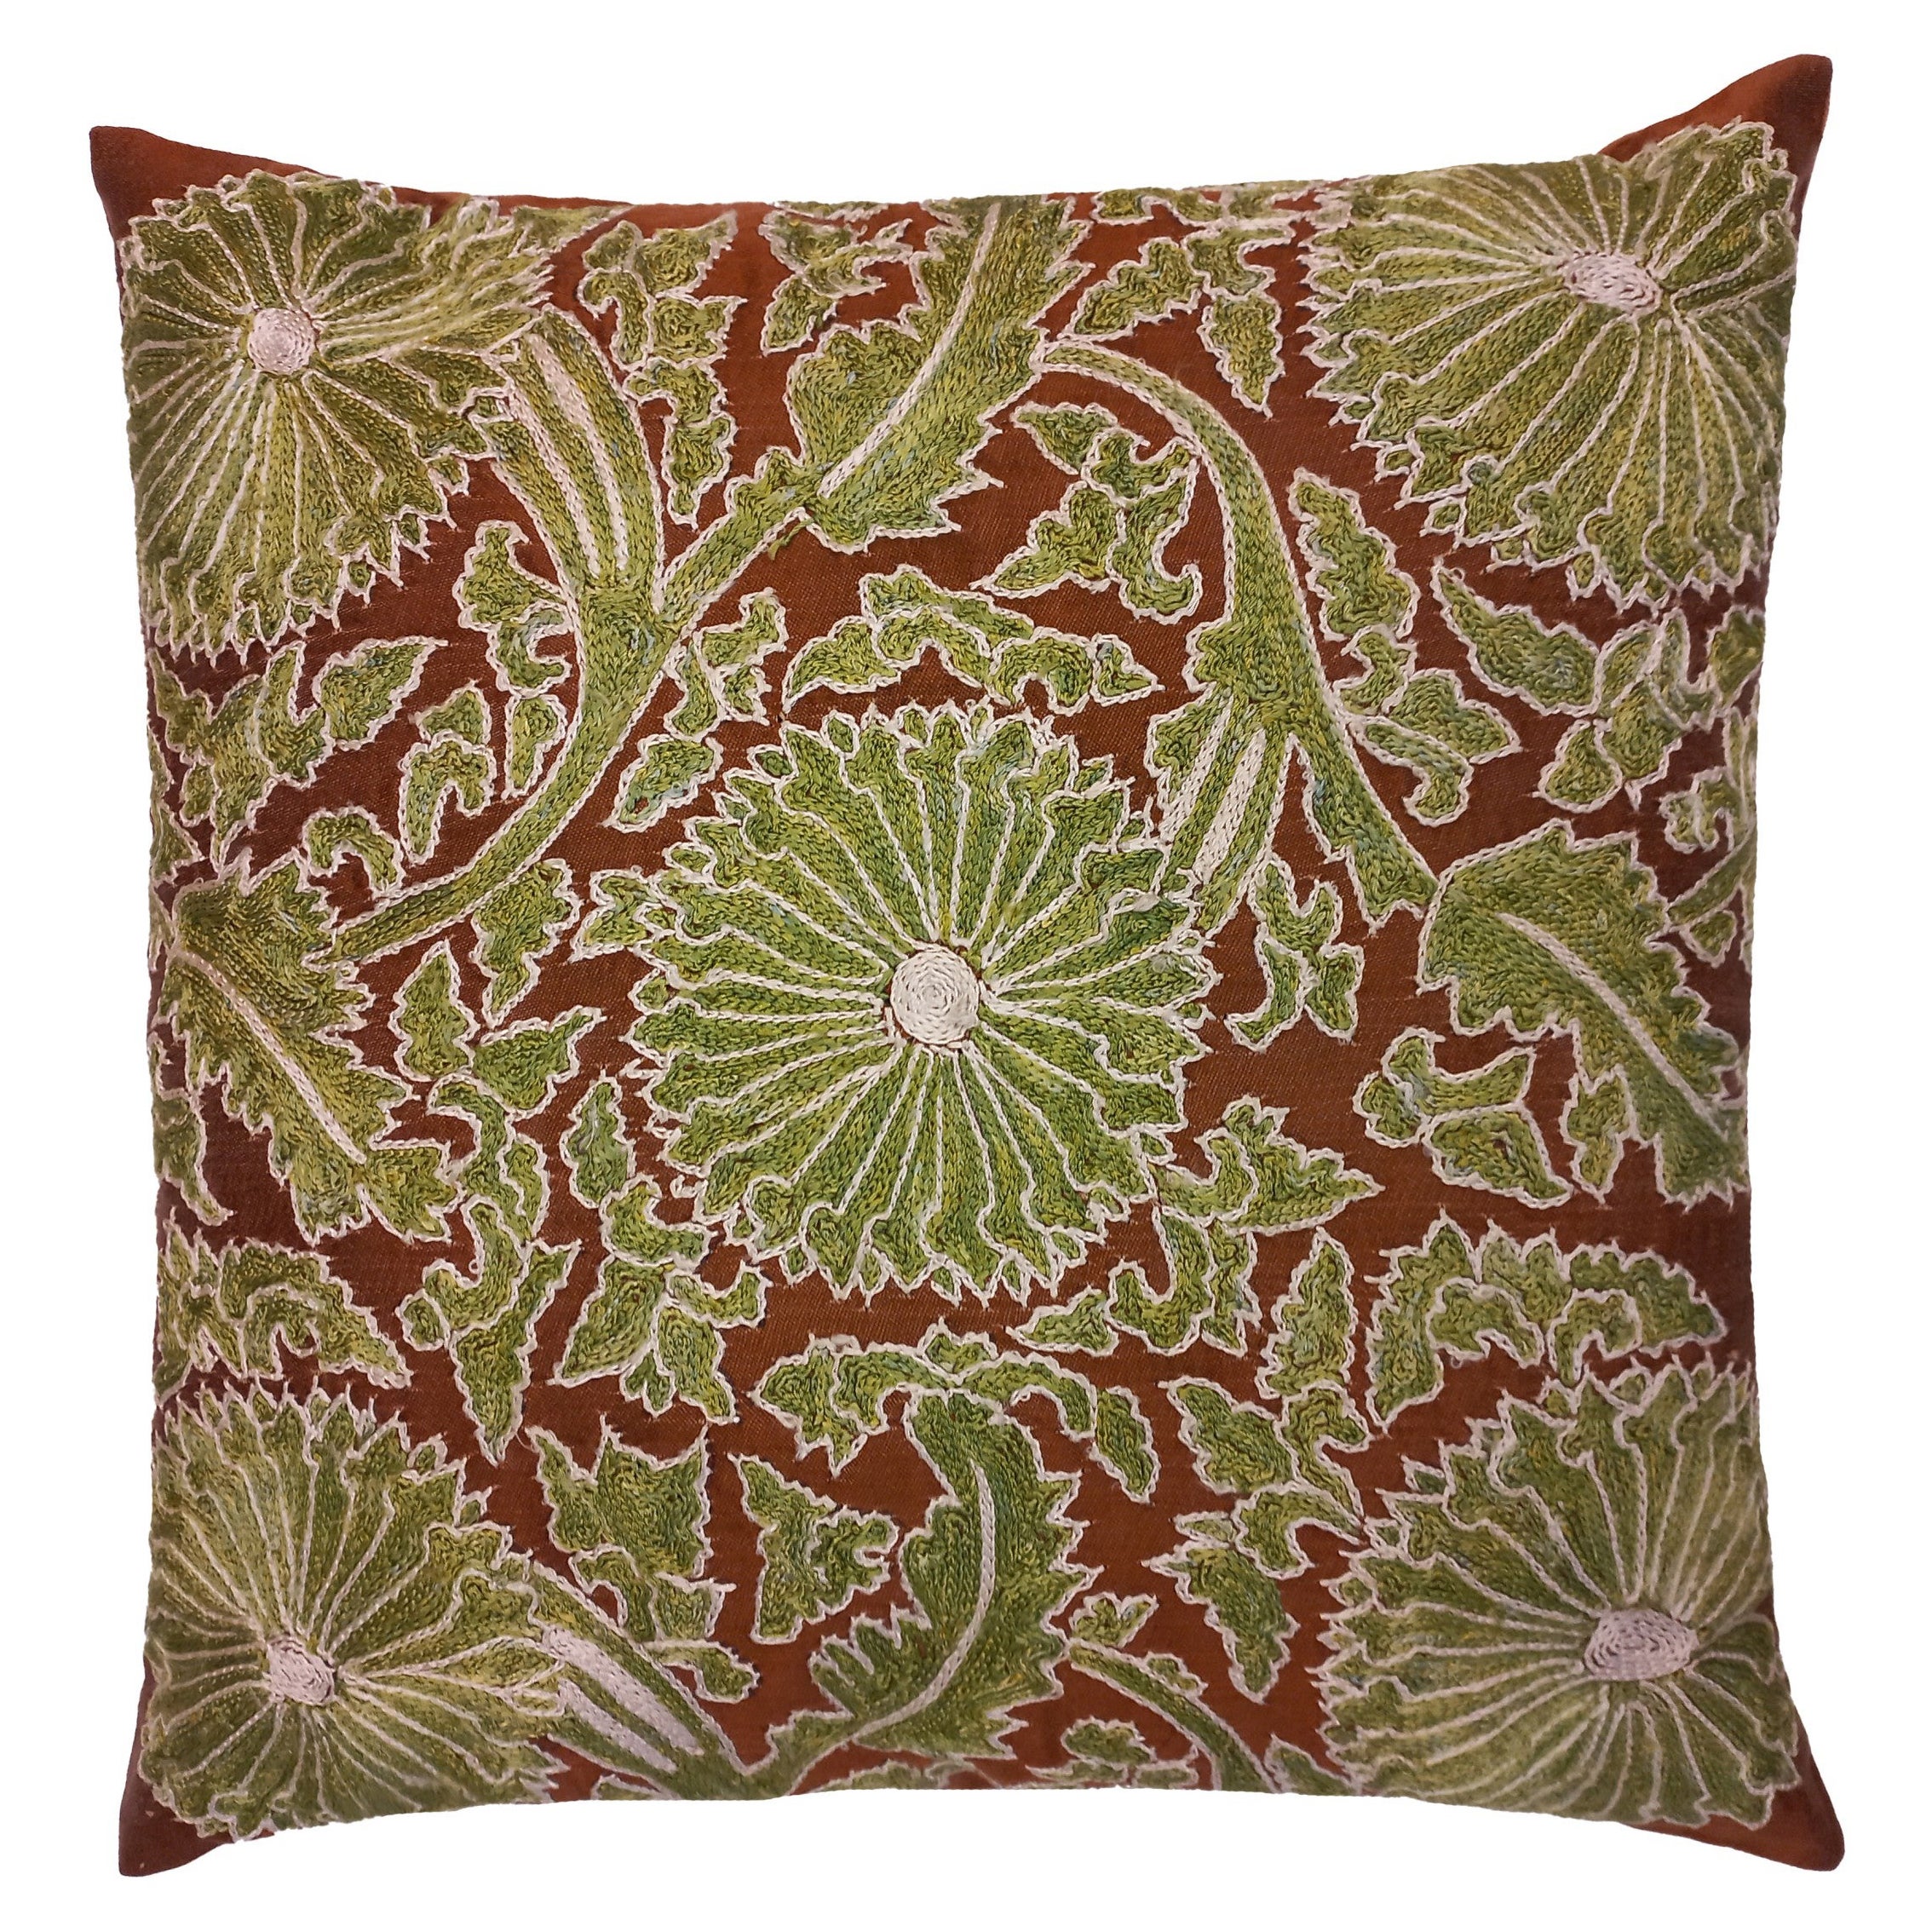 18"x19" Embroidered 100% Silk Cushion Cover in Brown & Green, Suzani Pillowcase